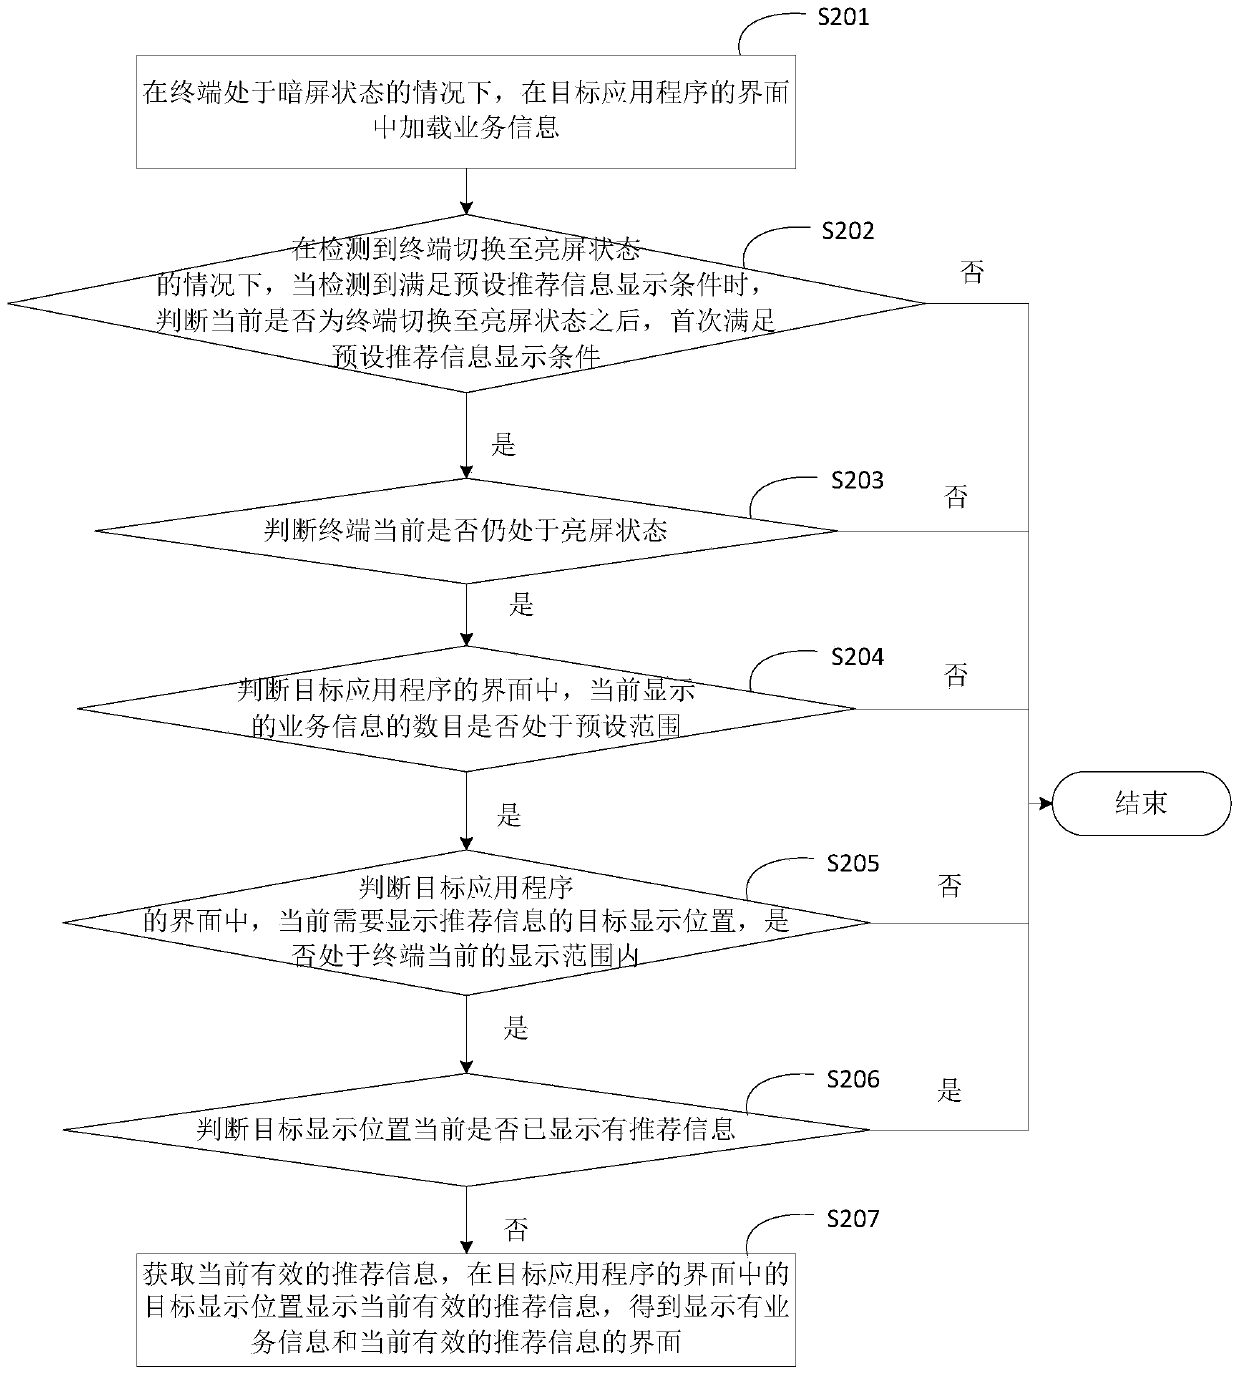 Recommendation information display method and device